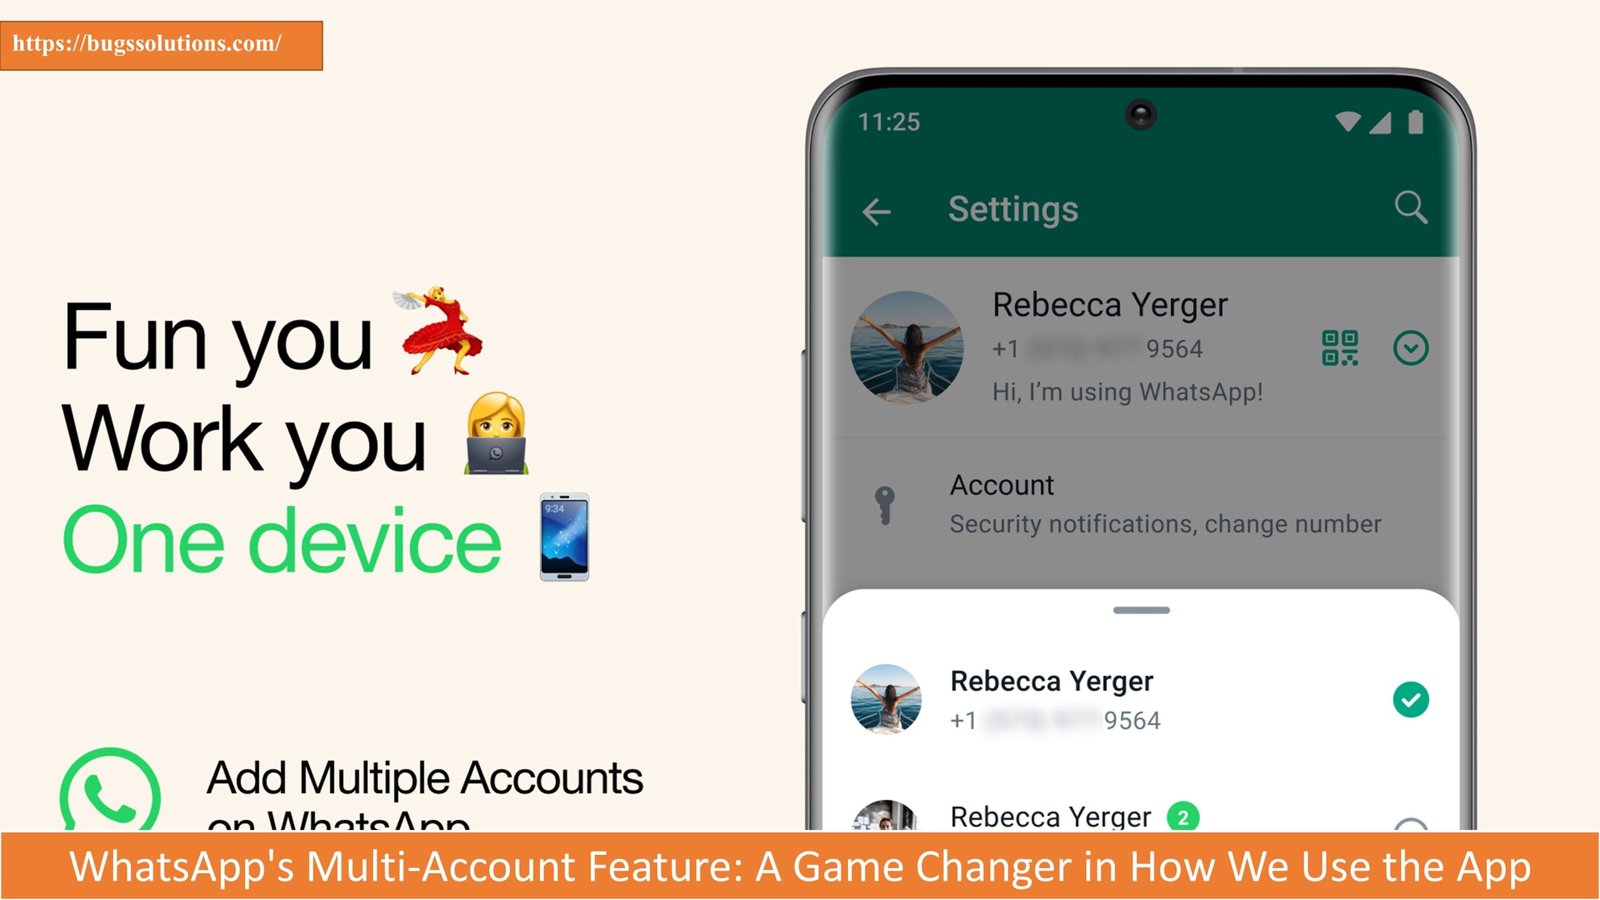 WhatsApp's Multi-Account Feature: A Game Changer in How We Use the App